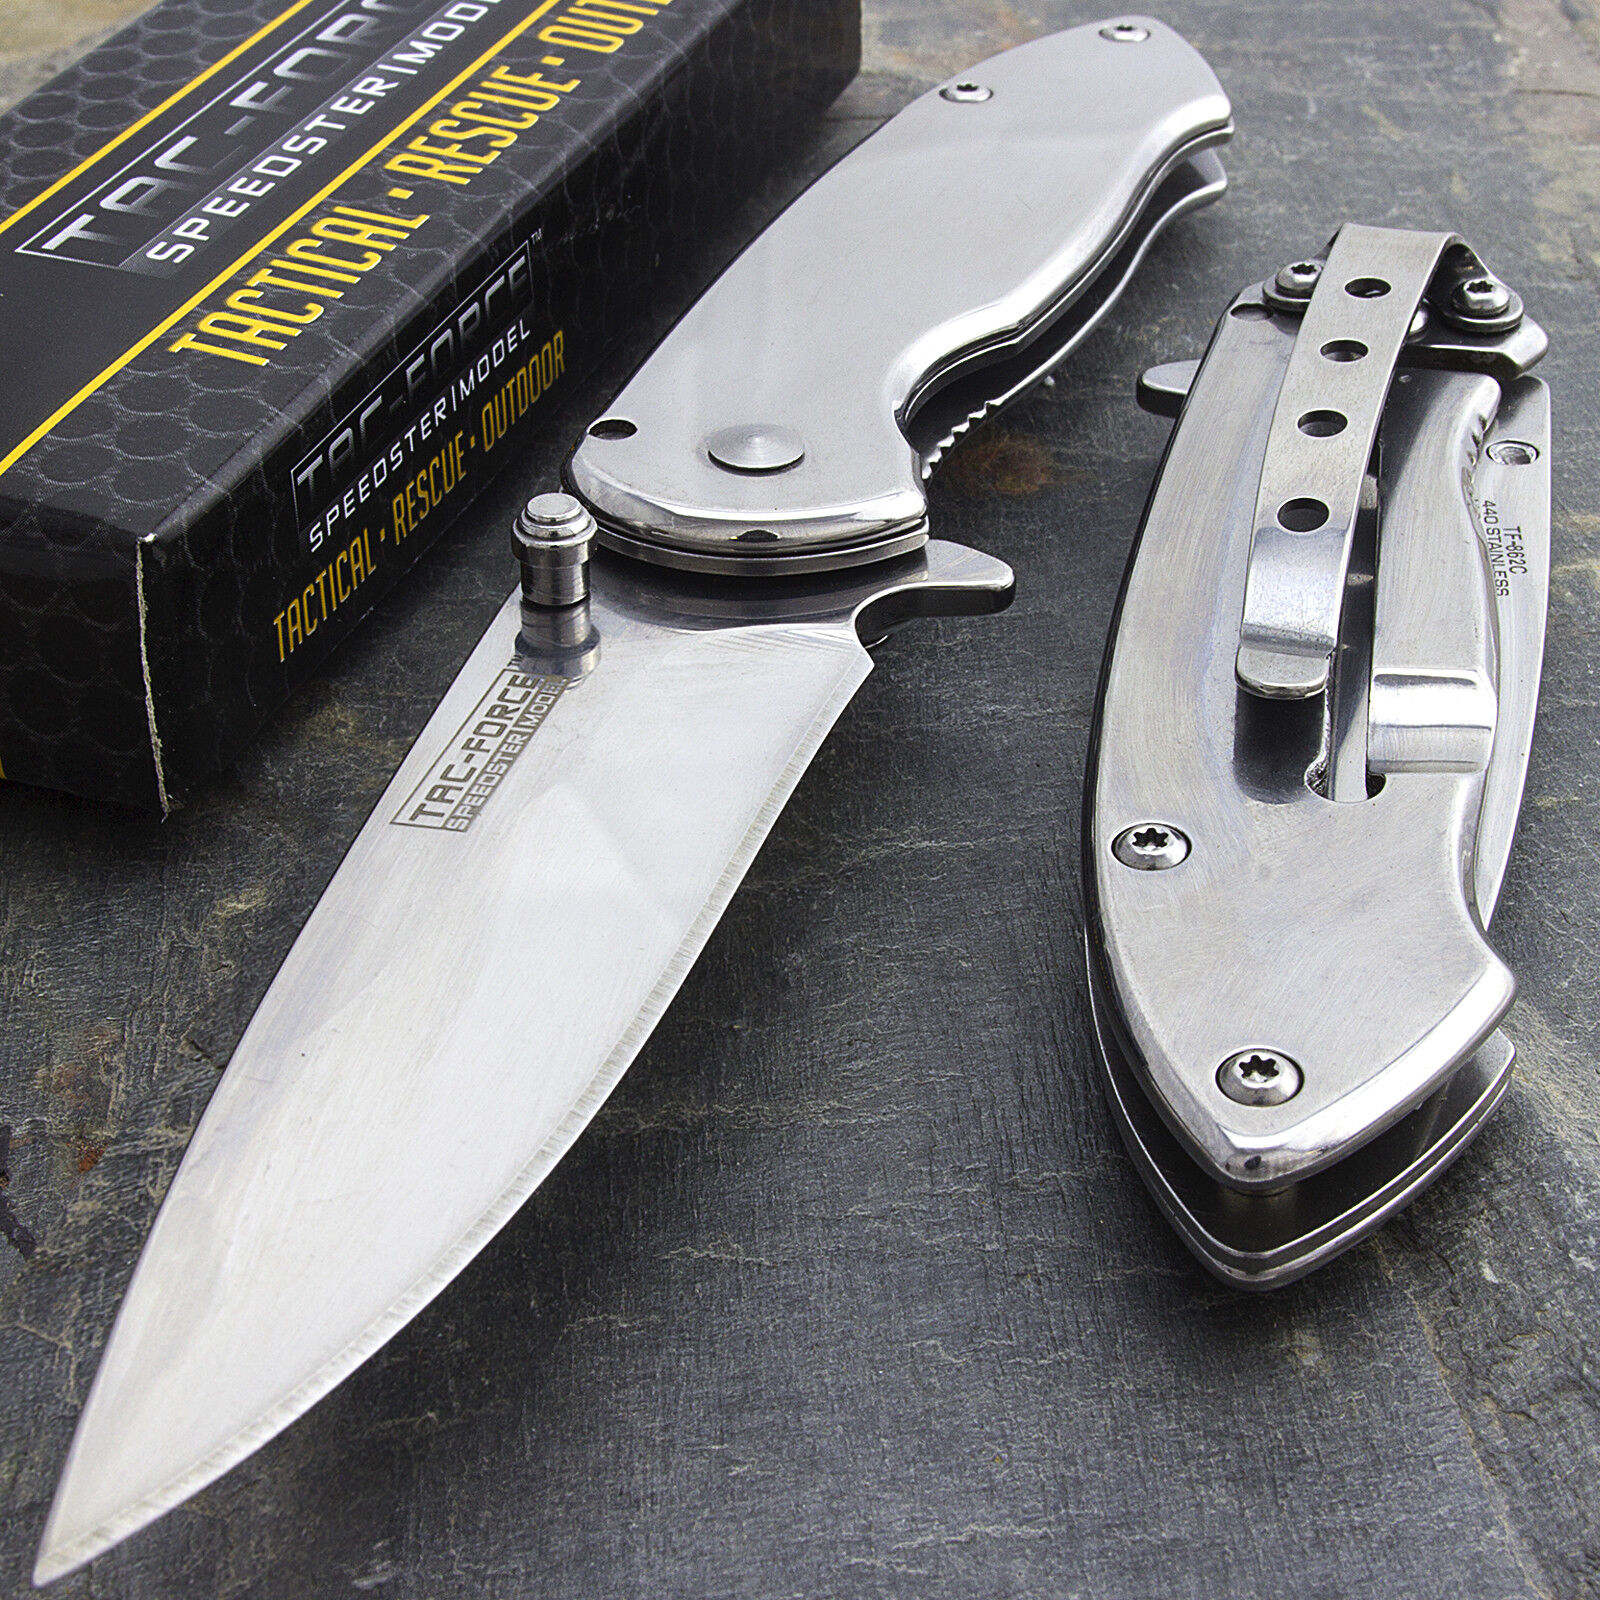 7" TAC FORCE EDC MIRROR BLADE SPRING ASSISTED TACTICAL FOLDING KNIFE Assist Open Tac-Force TF-862C